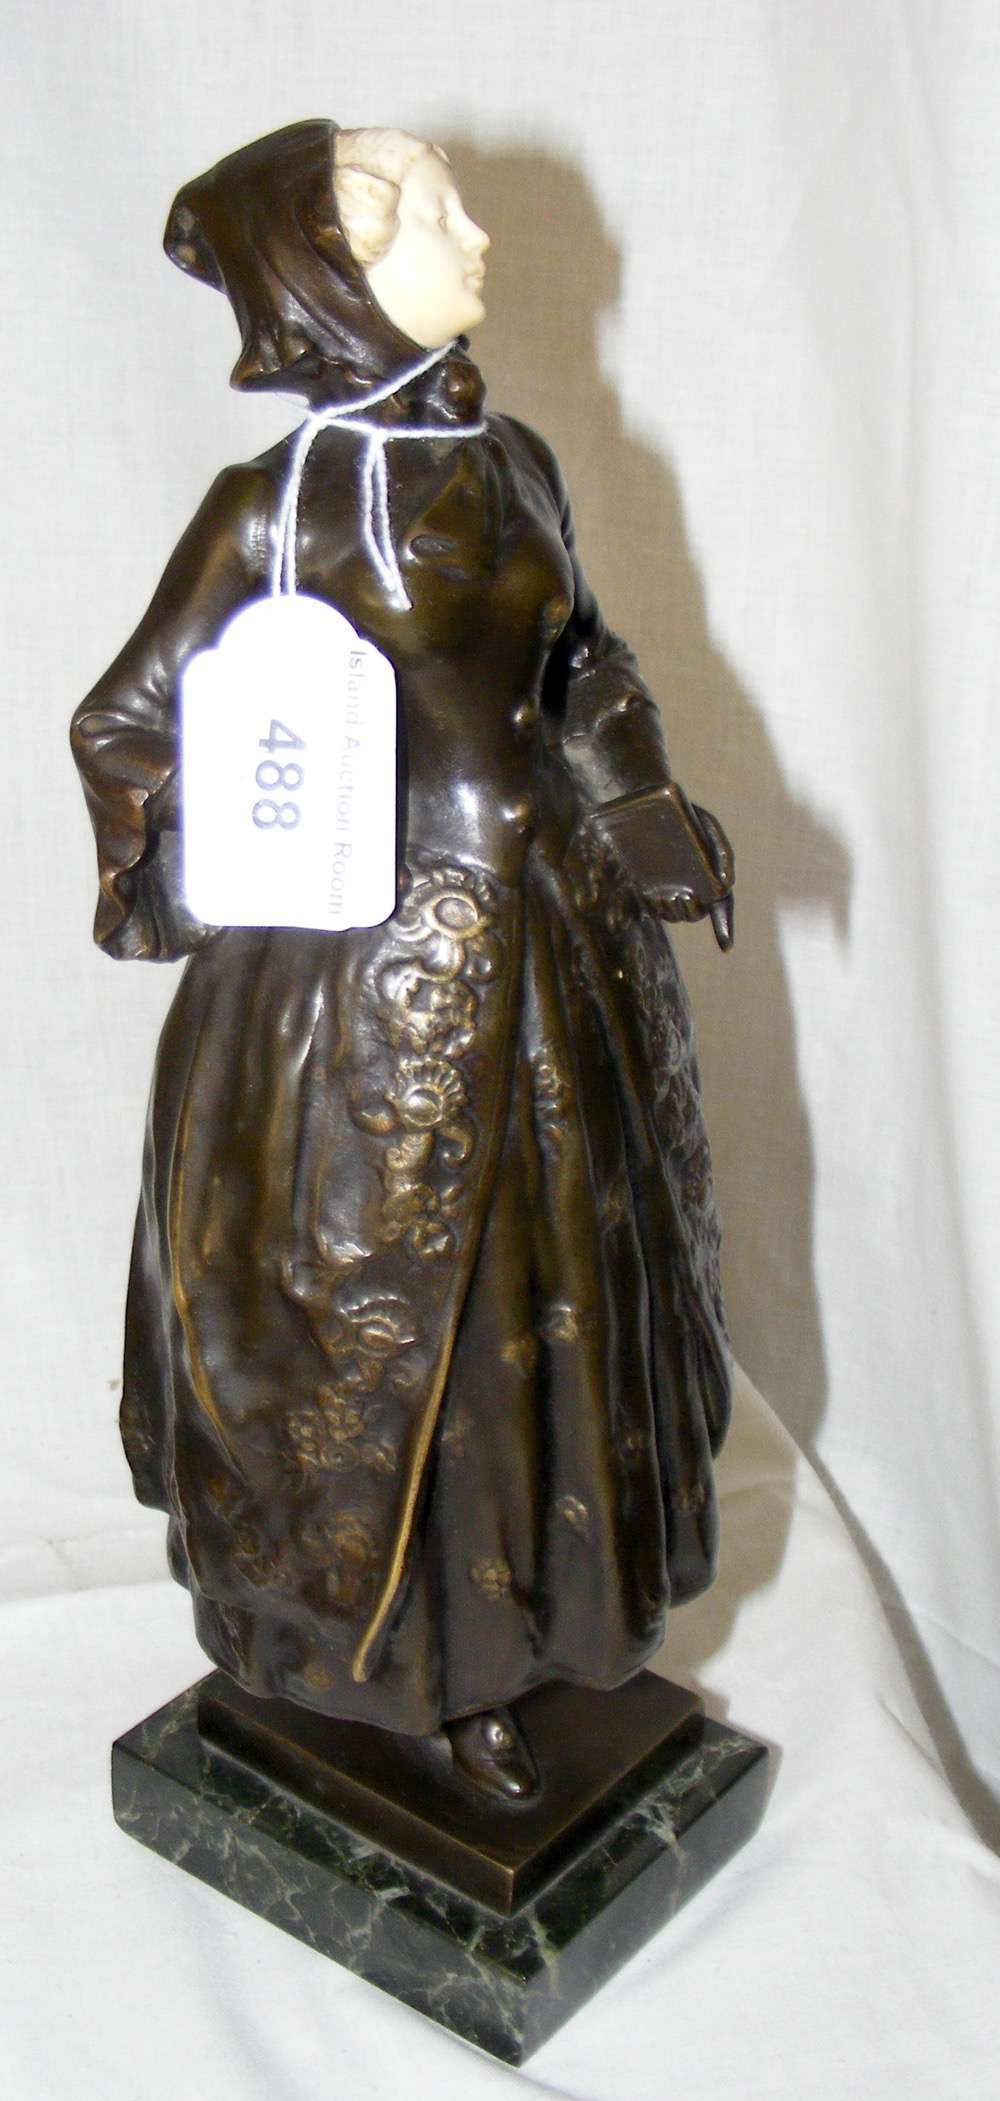 A bronze and ivory figure of a woman - signed F Lugerth - on marble base - 31cm high overall